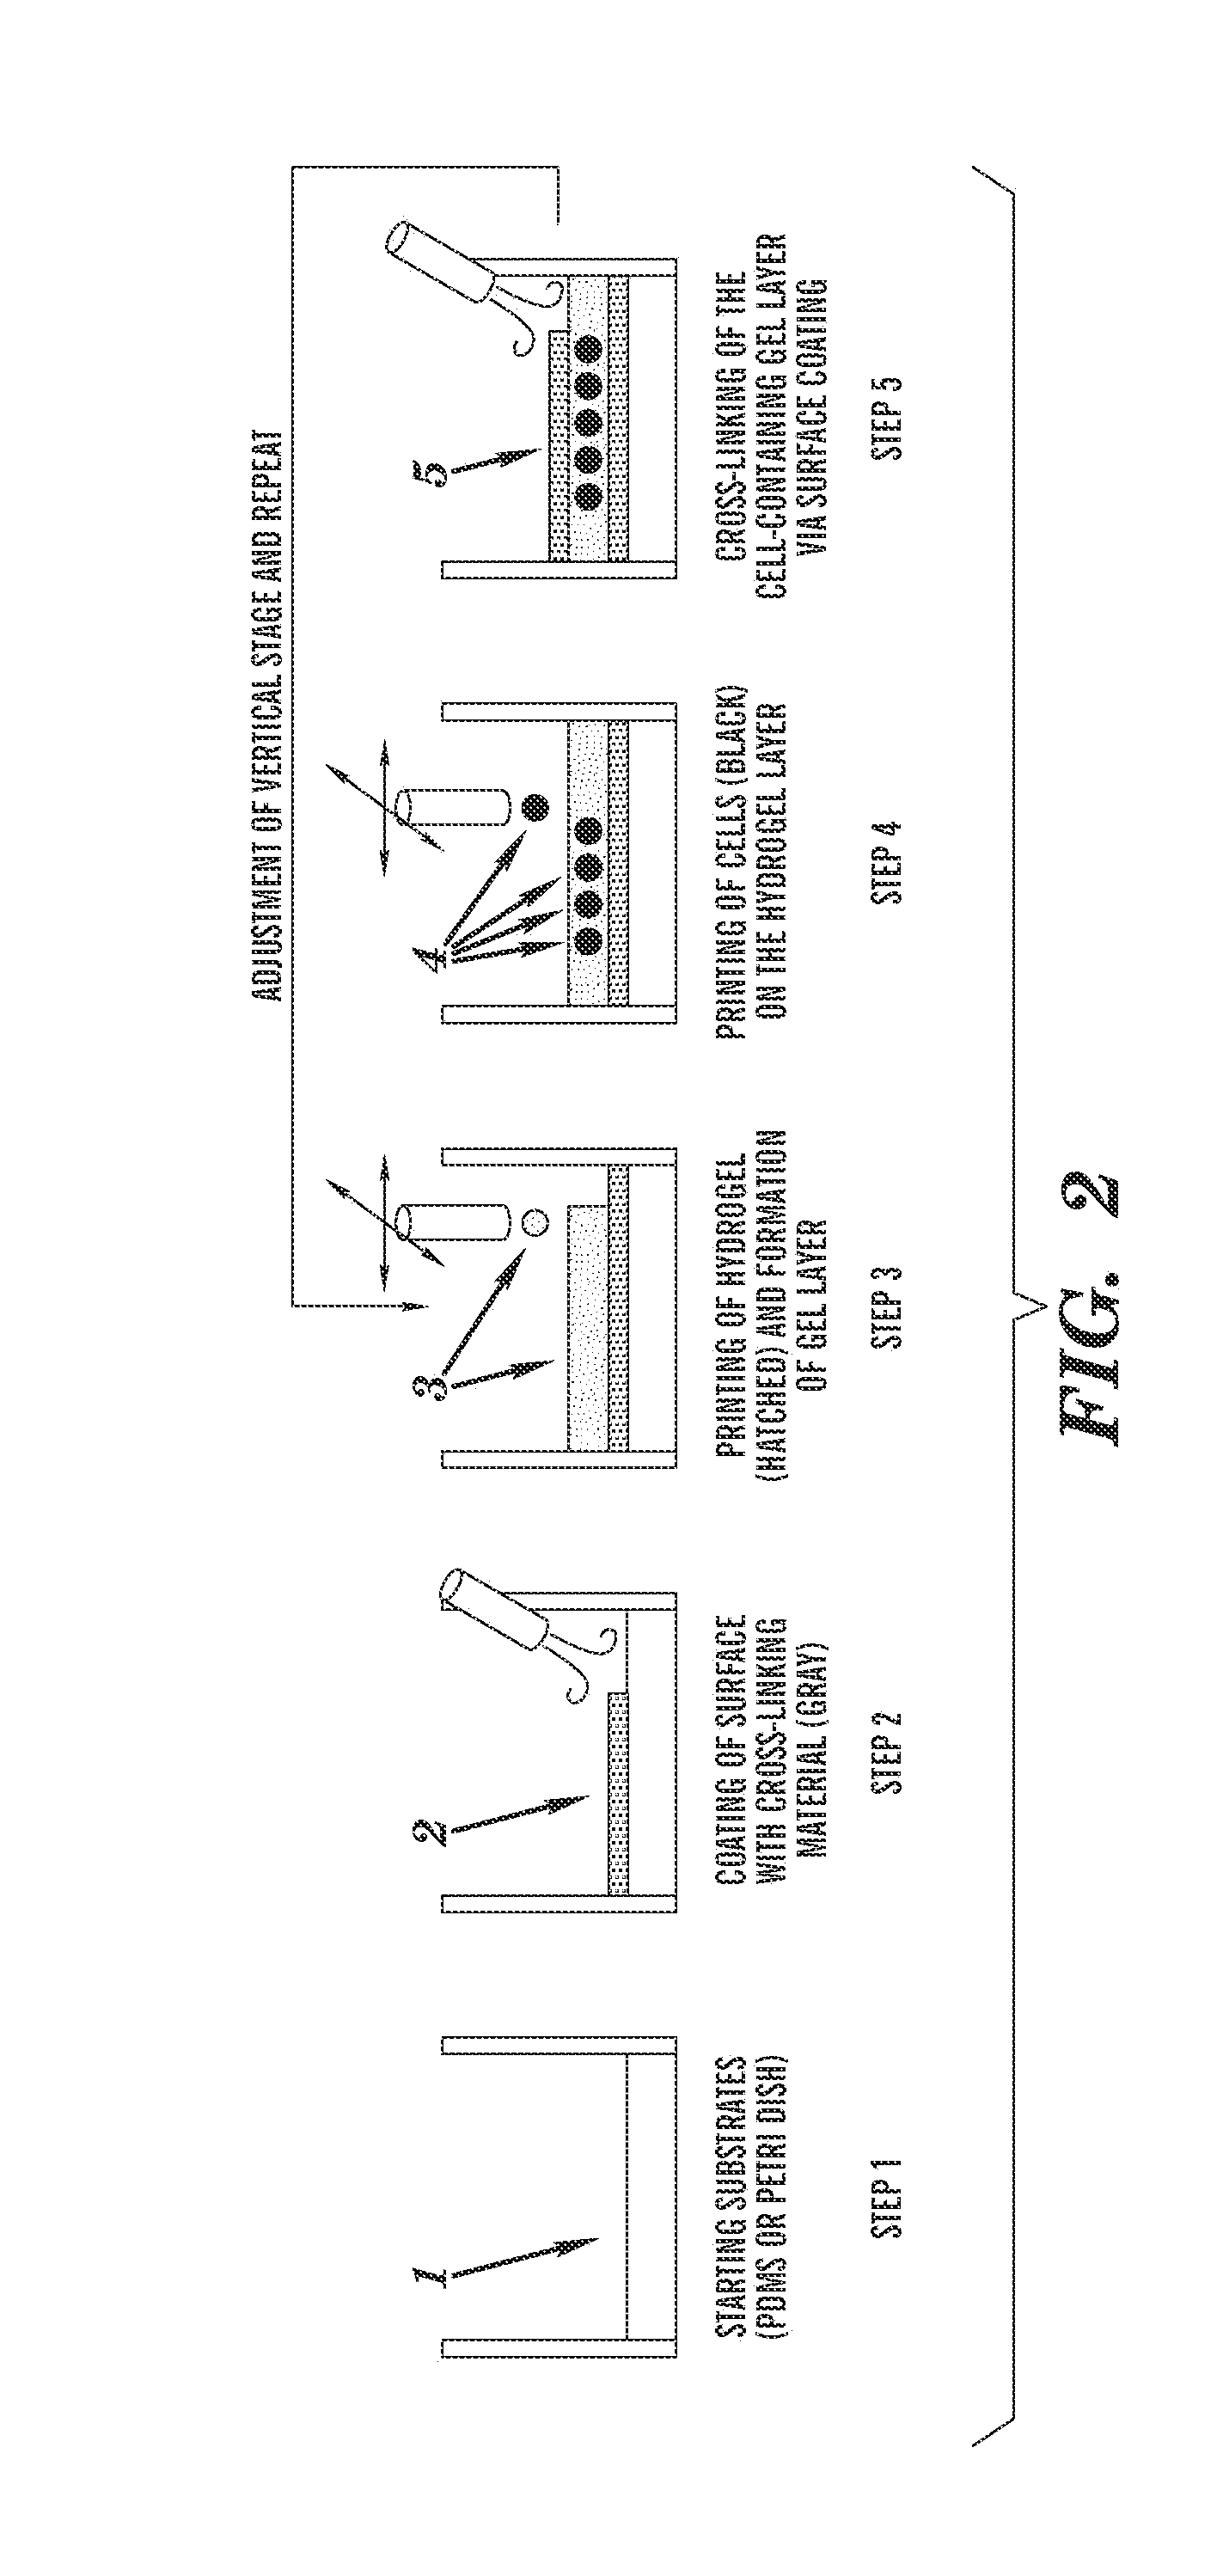 3-dimensional multi-layered hydrogels and methods of making the same